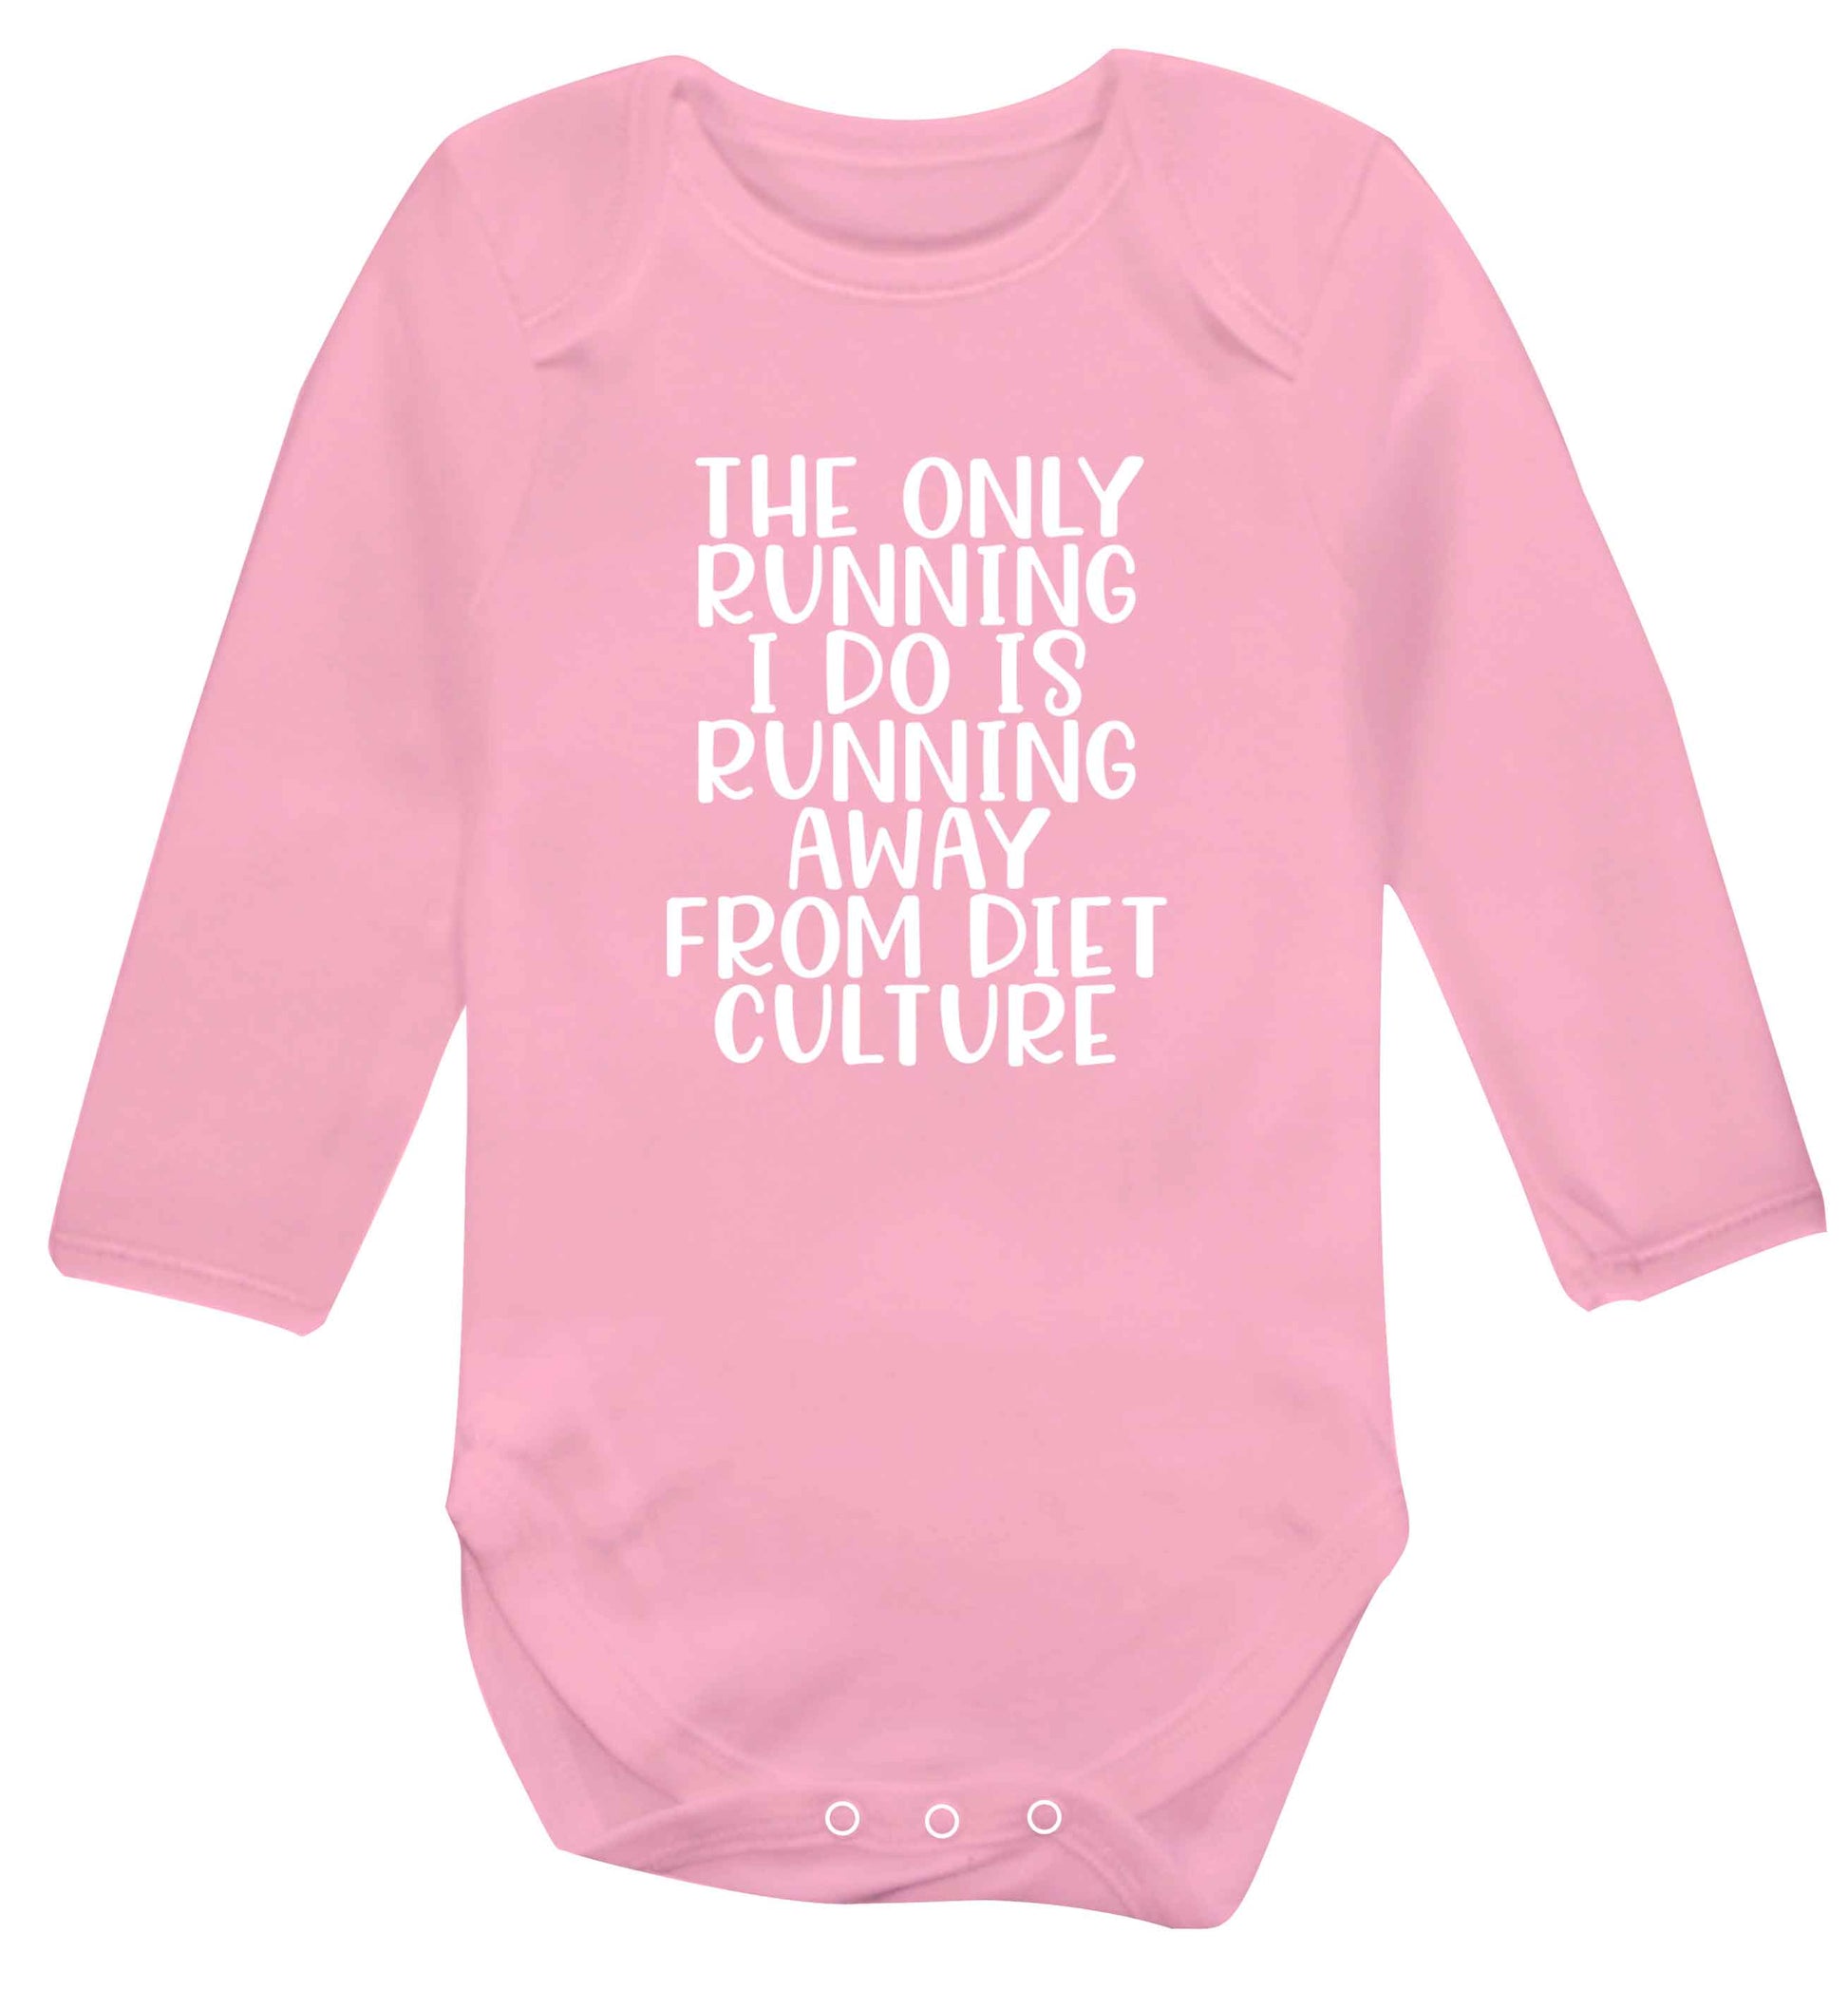 The only running I do is running away from diet culture baby vest long sleeved pale pink 6-12 months